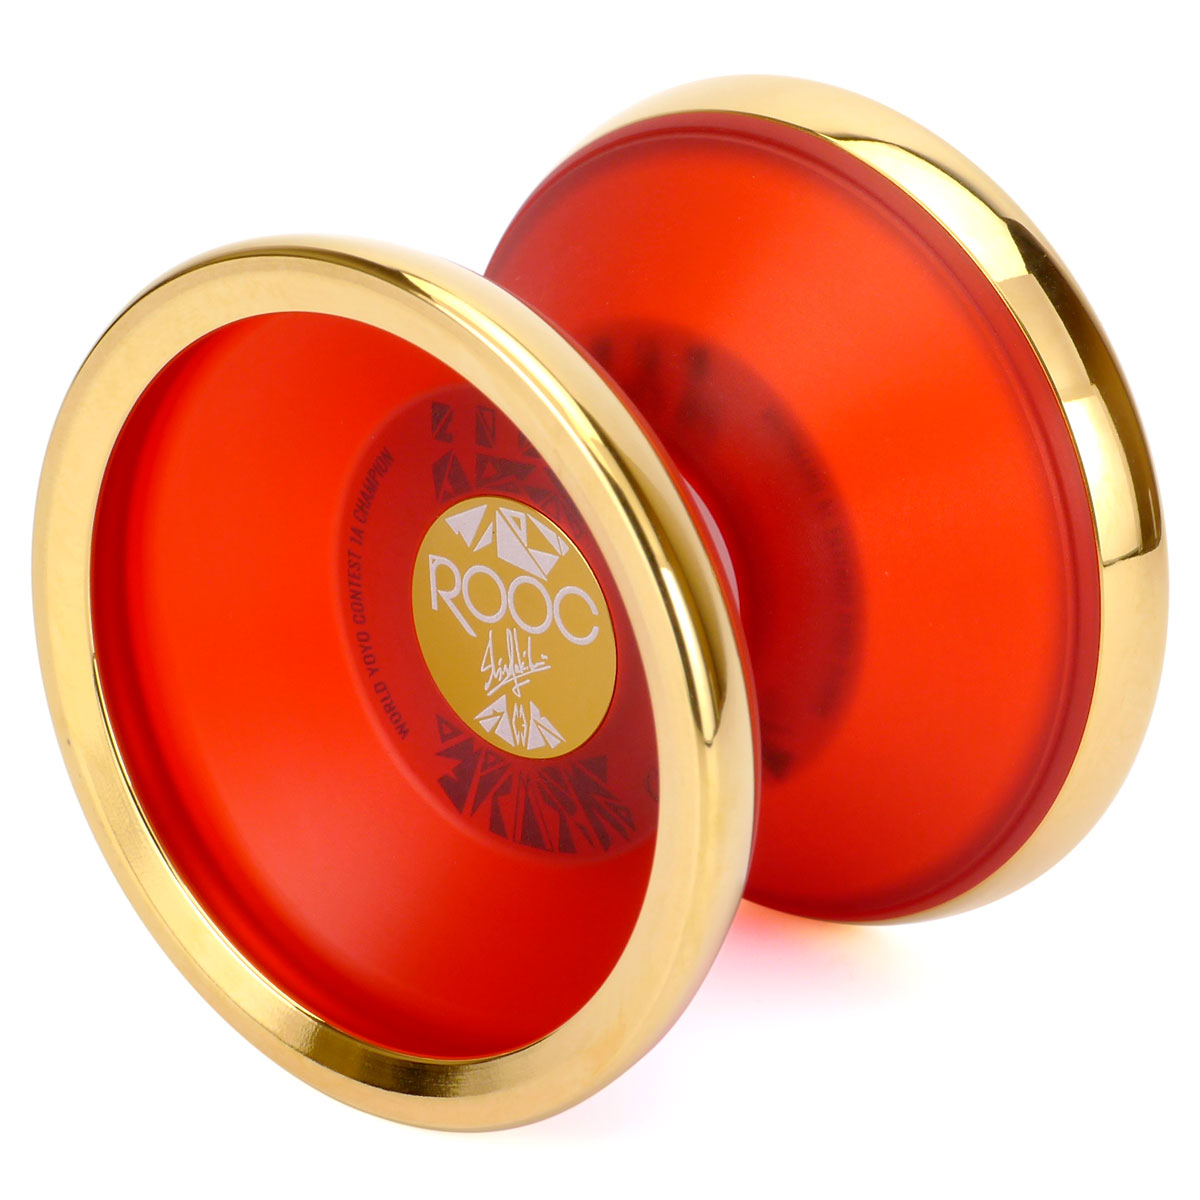 SPINGEAR - C3yoyodesign ROOC